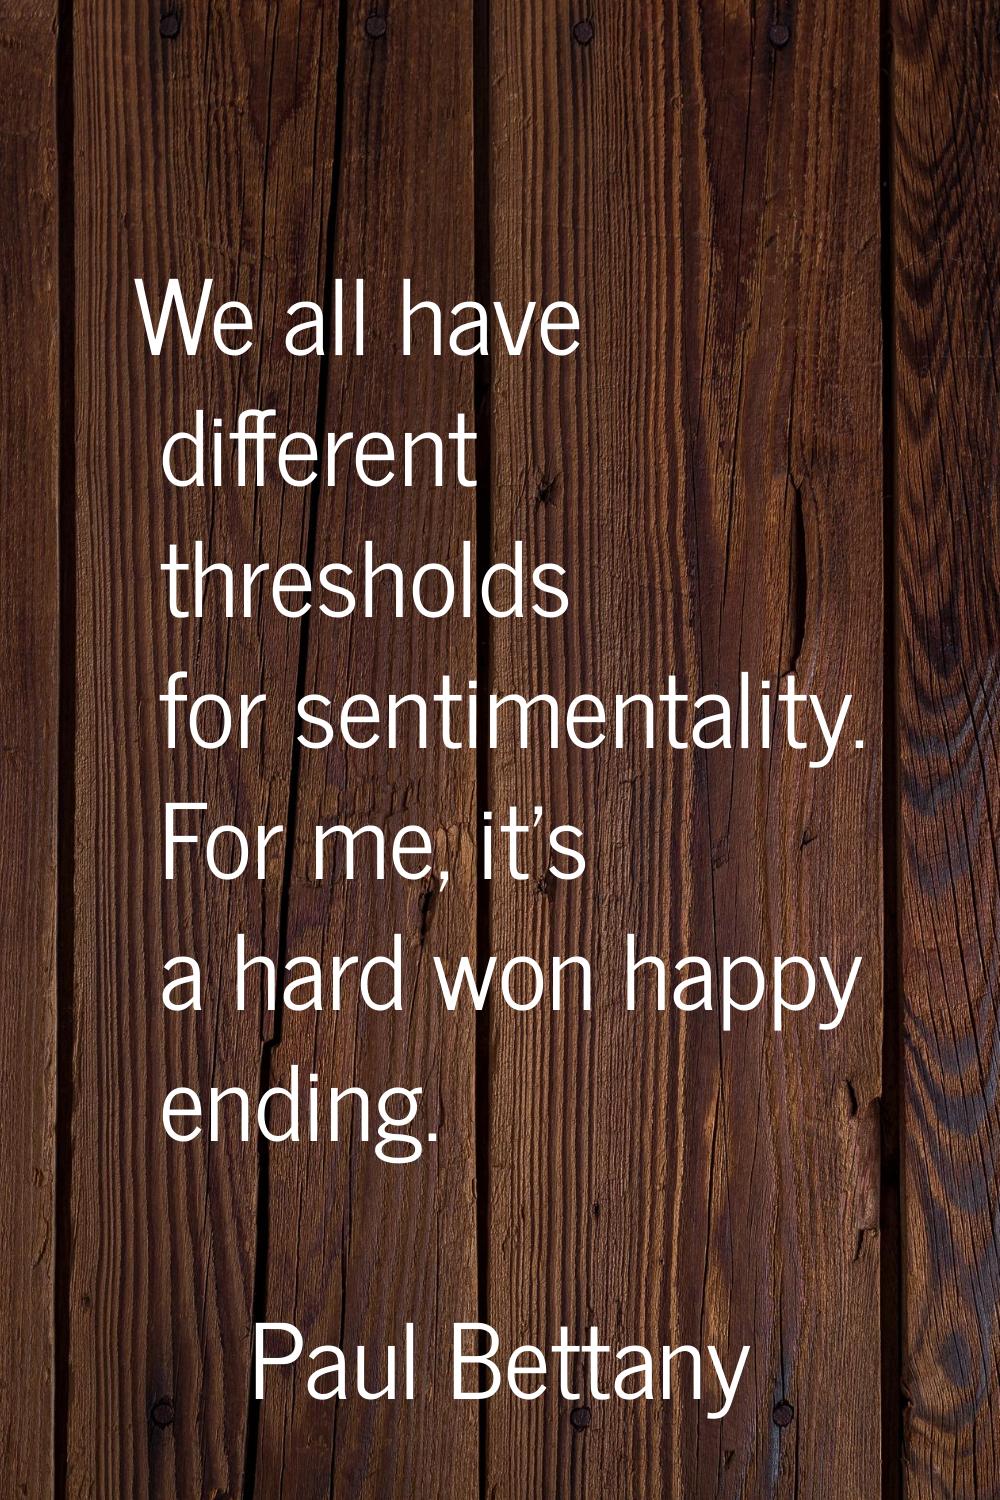 We all have different thresholds for sentimentality. For me, it's a hard won happy ending.